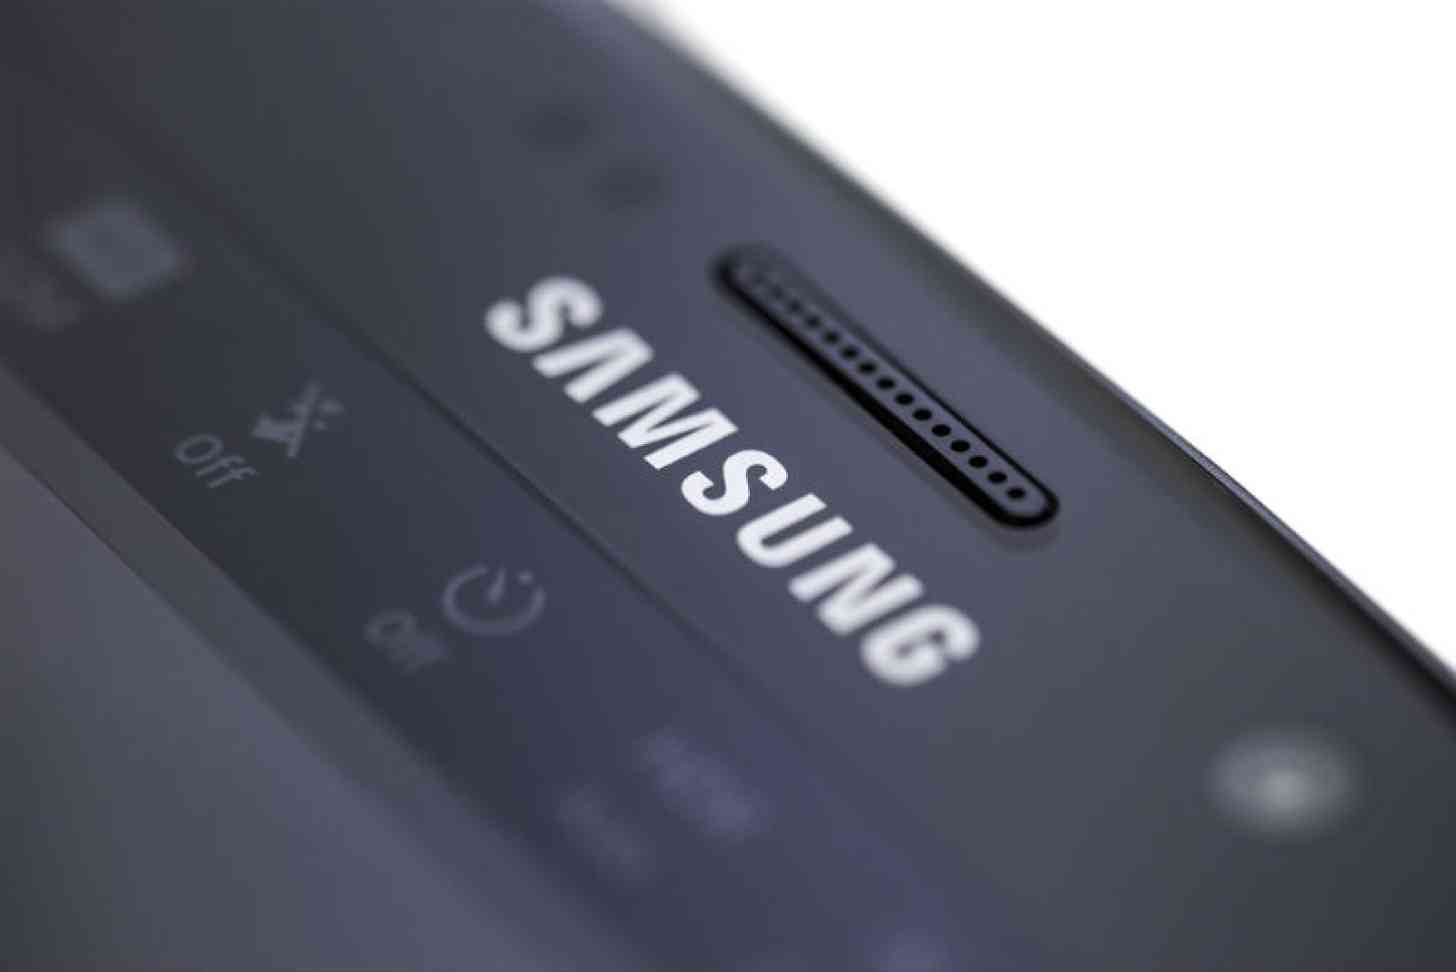 samsung-galaxy-note-9-price-leaked